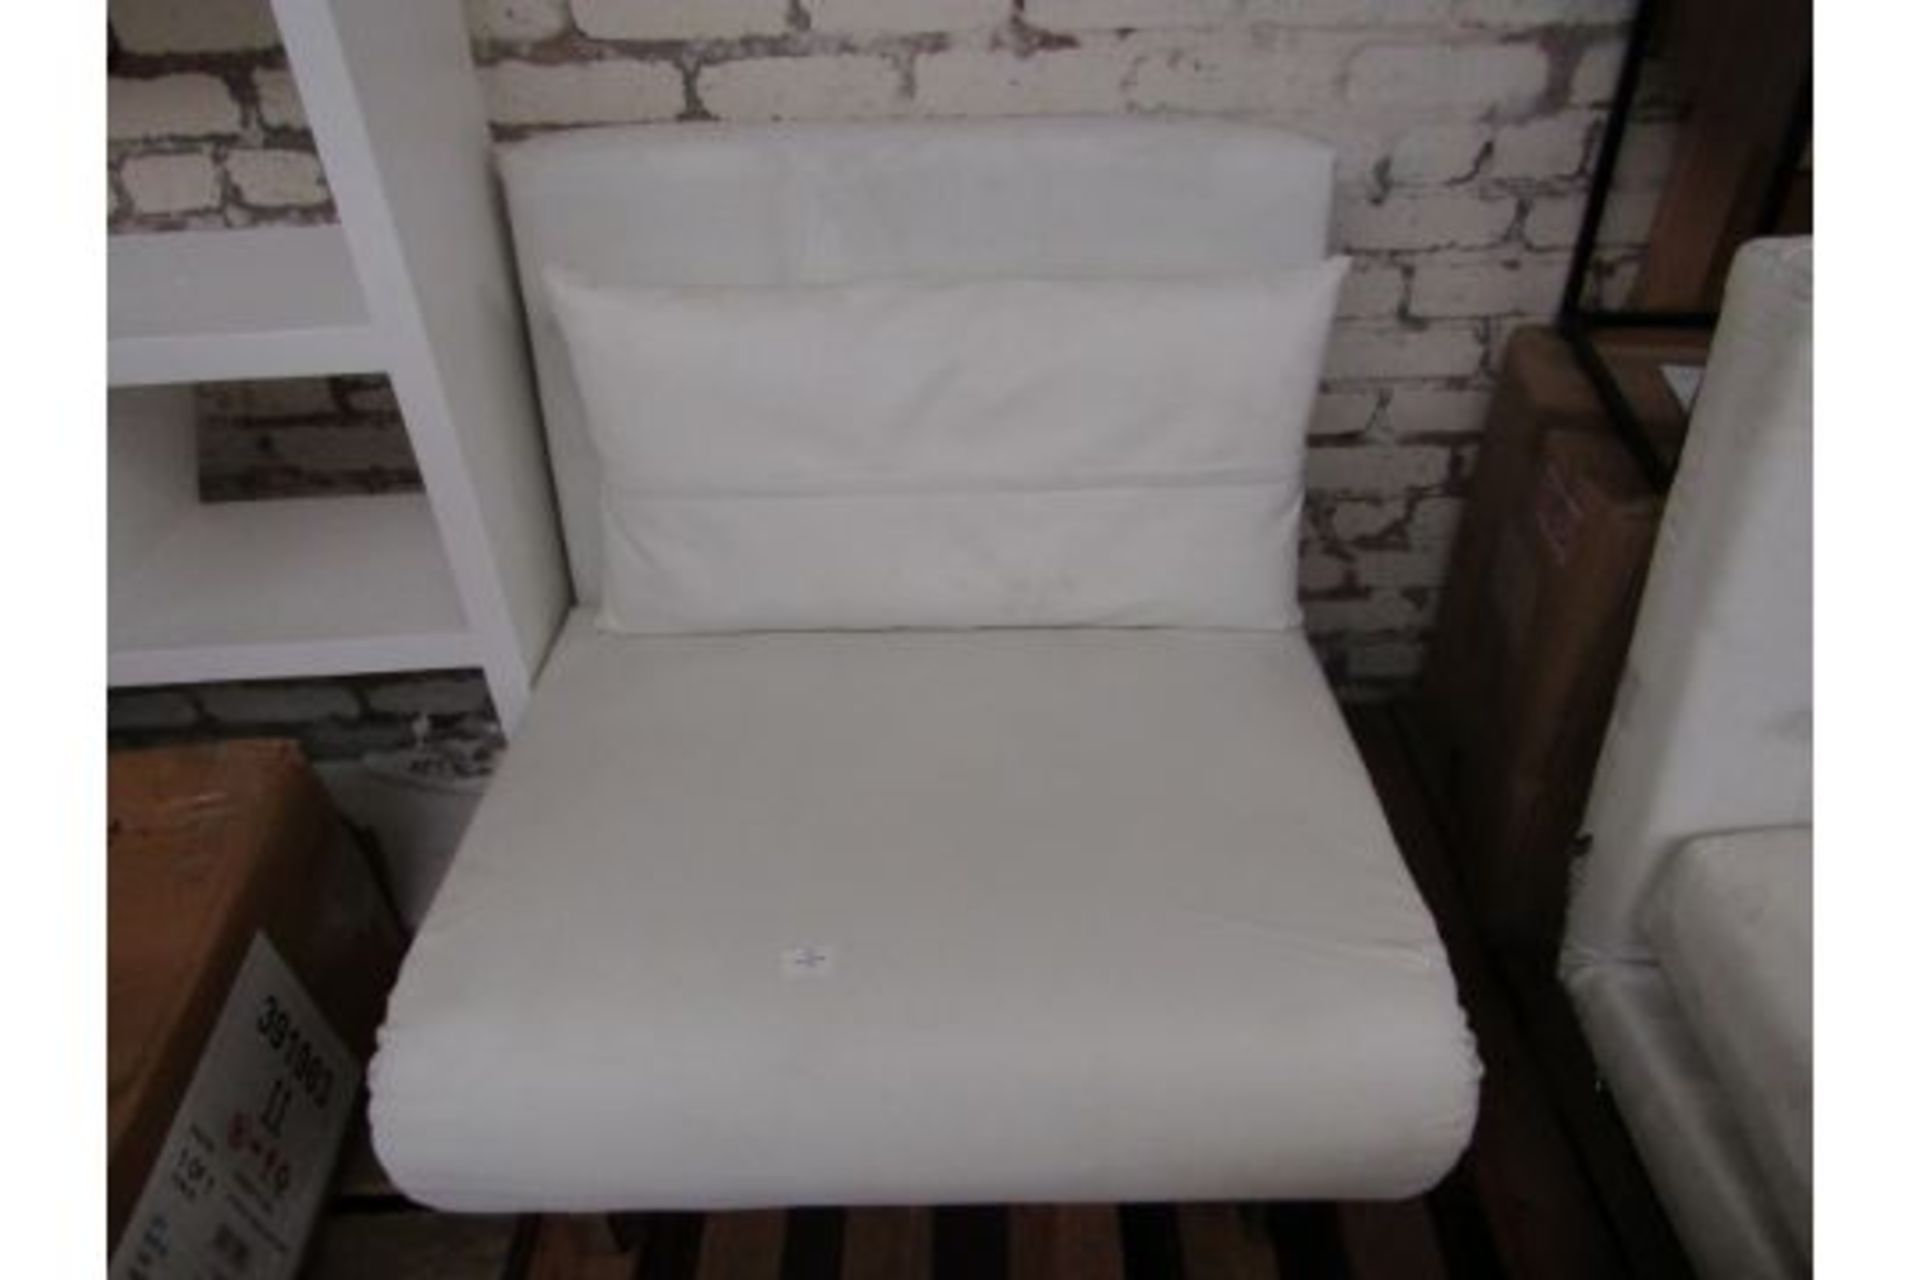 1 x Dwell Stylus faux leather chair bed - Please Note Missing Cushion & Zip Damaged Also Needs A